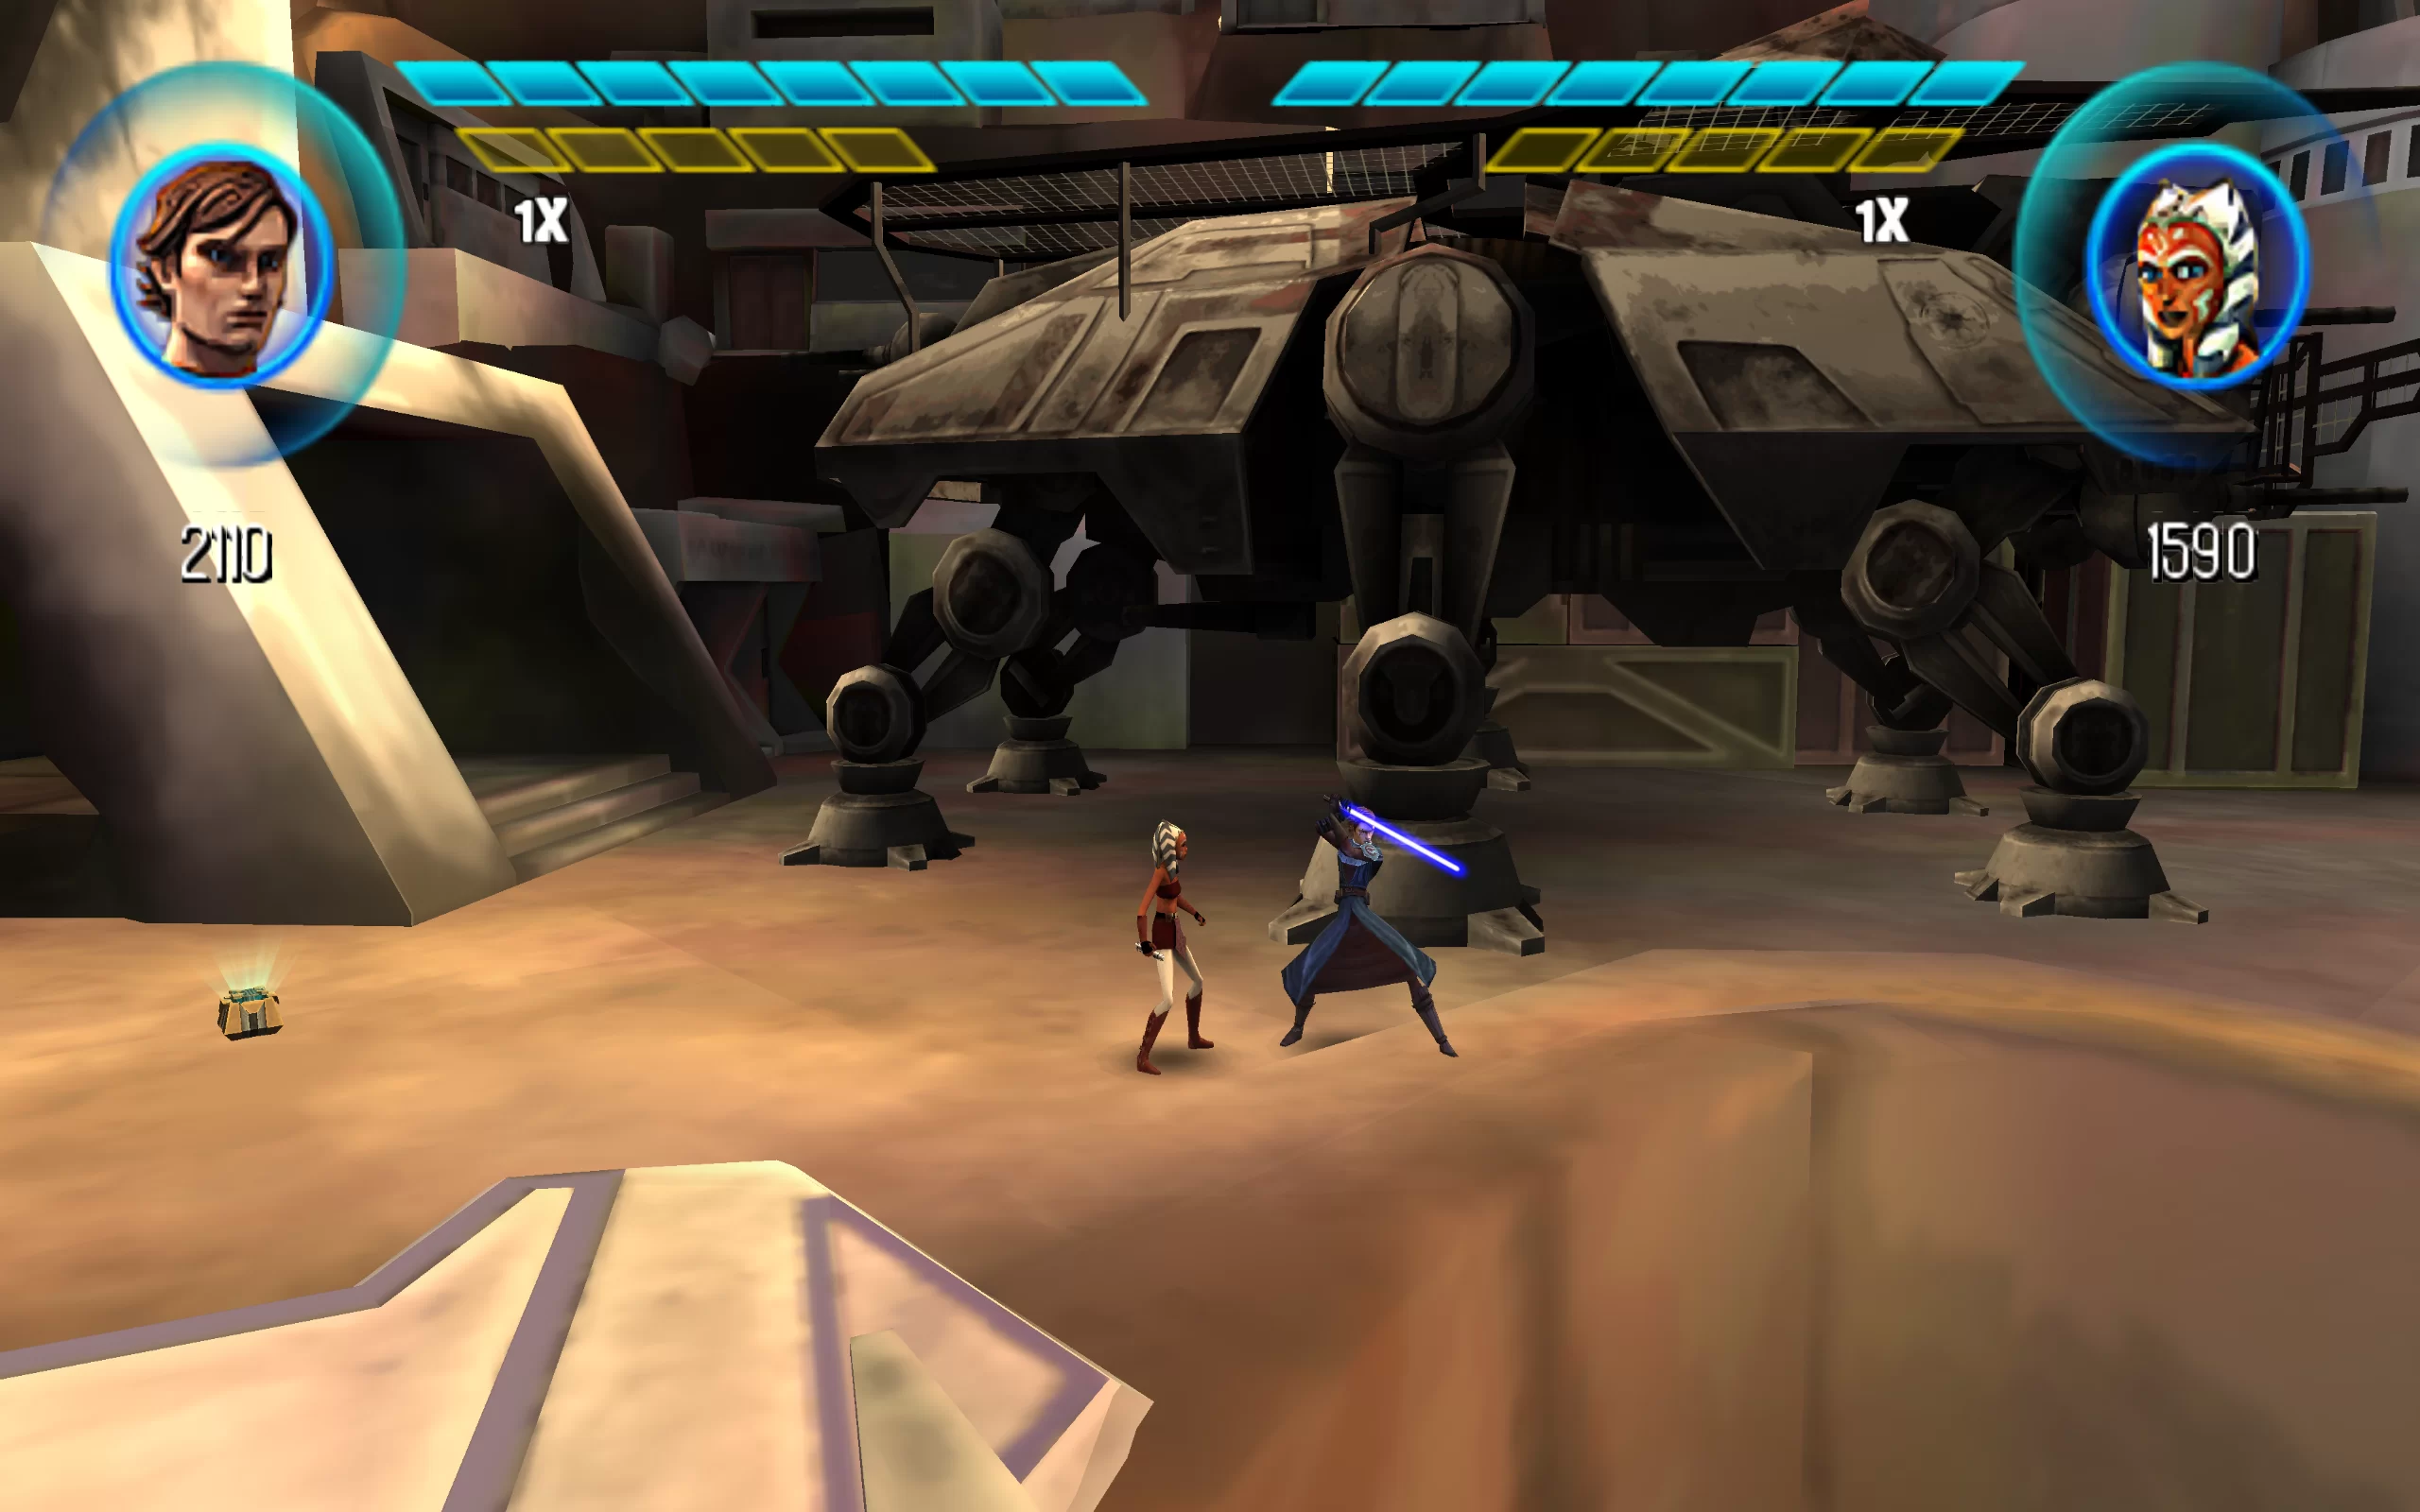 Star Wars: The Clone Wars — Republic Heroes PSP (PlayStation Portable)